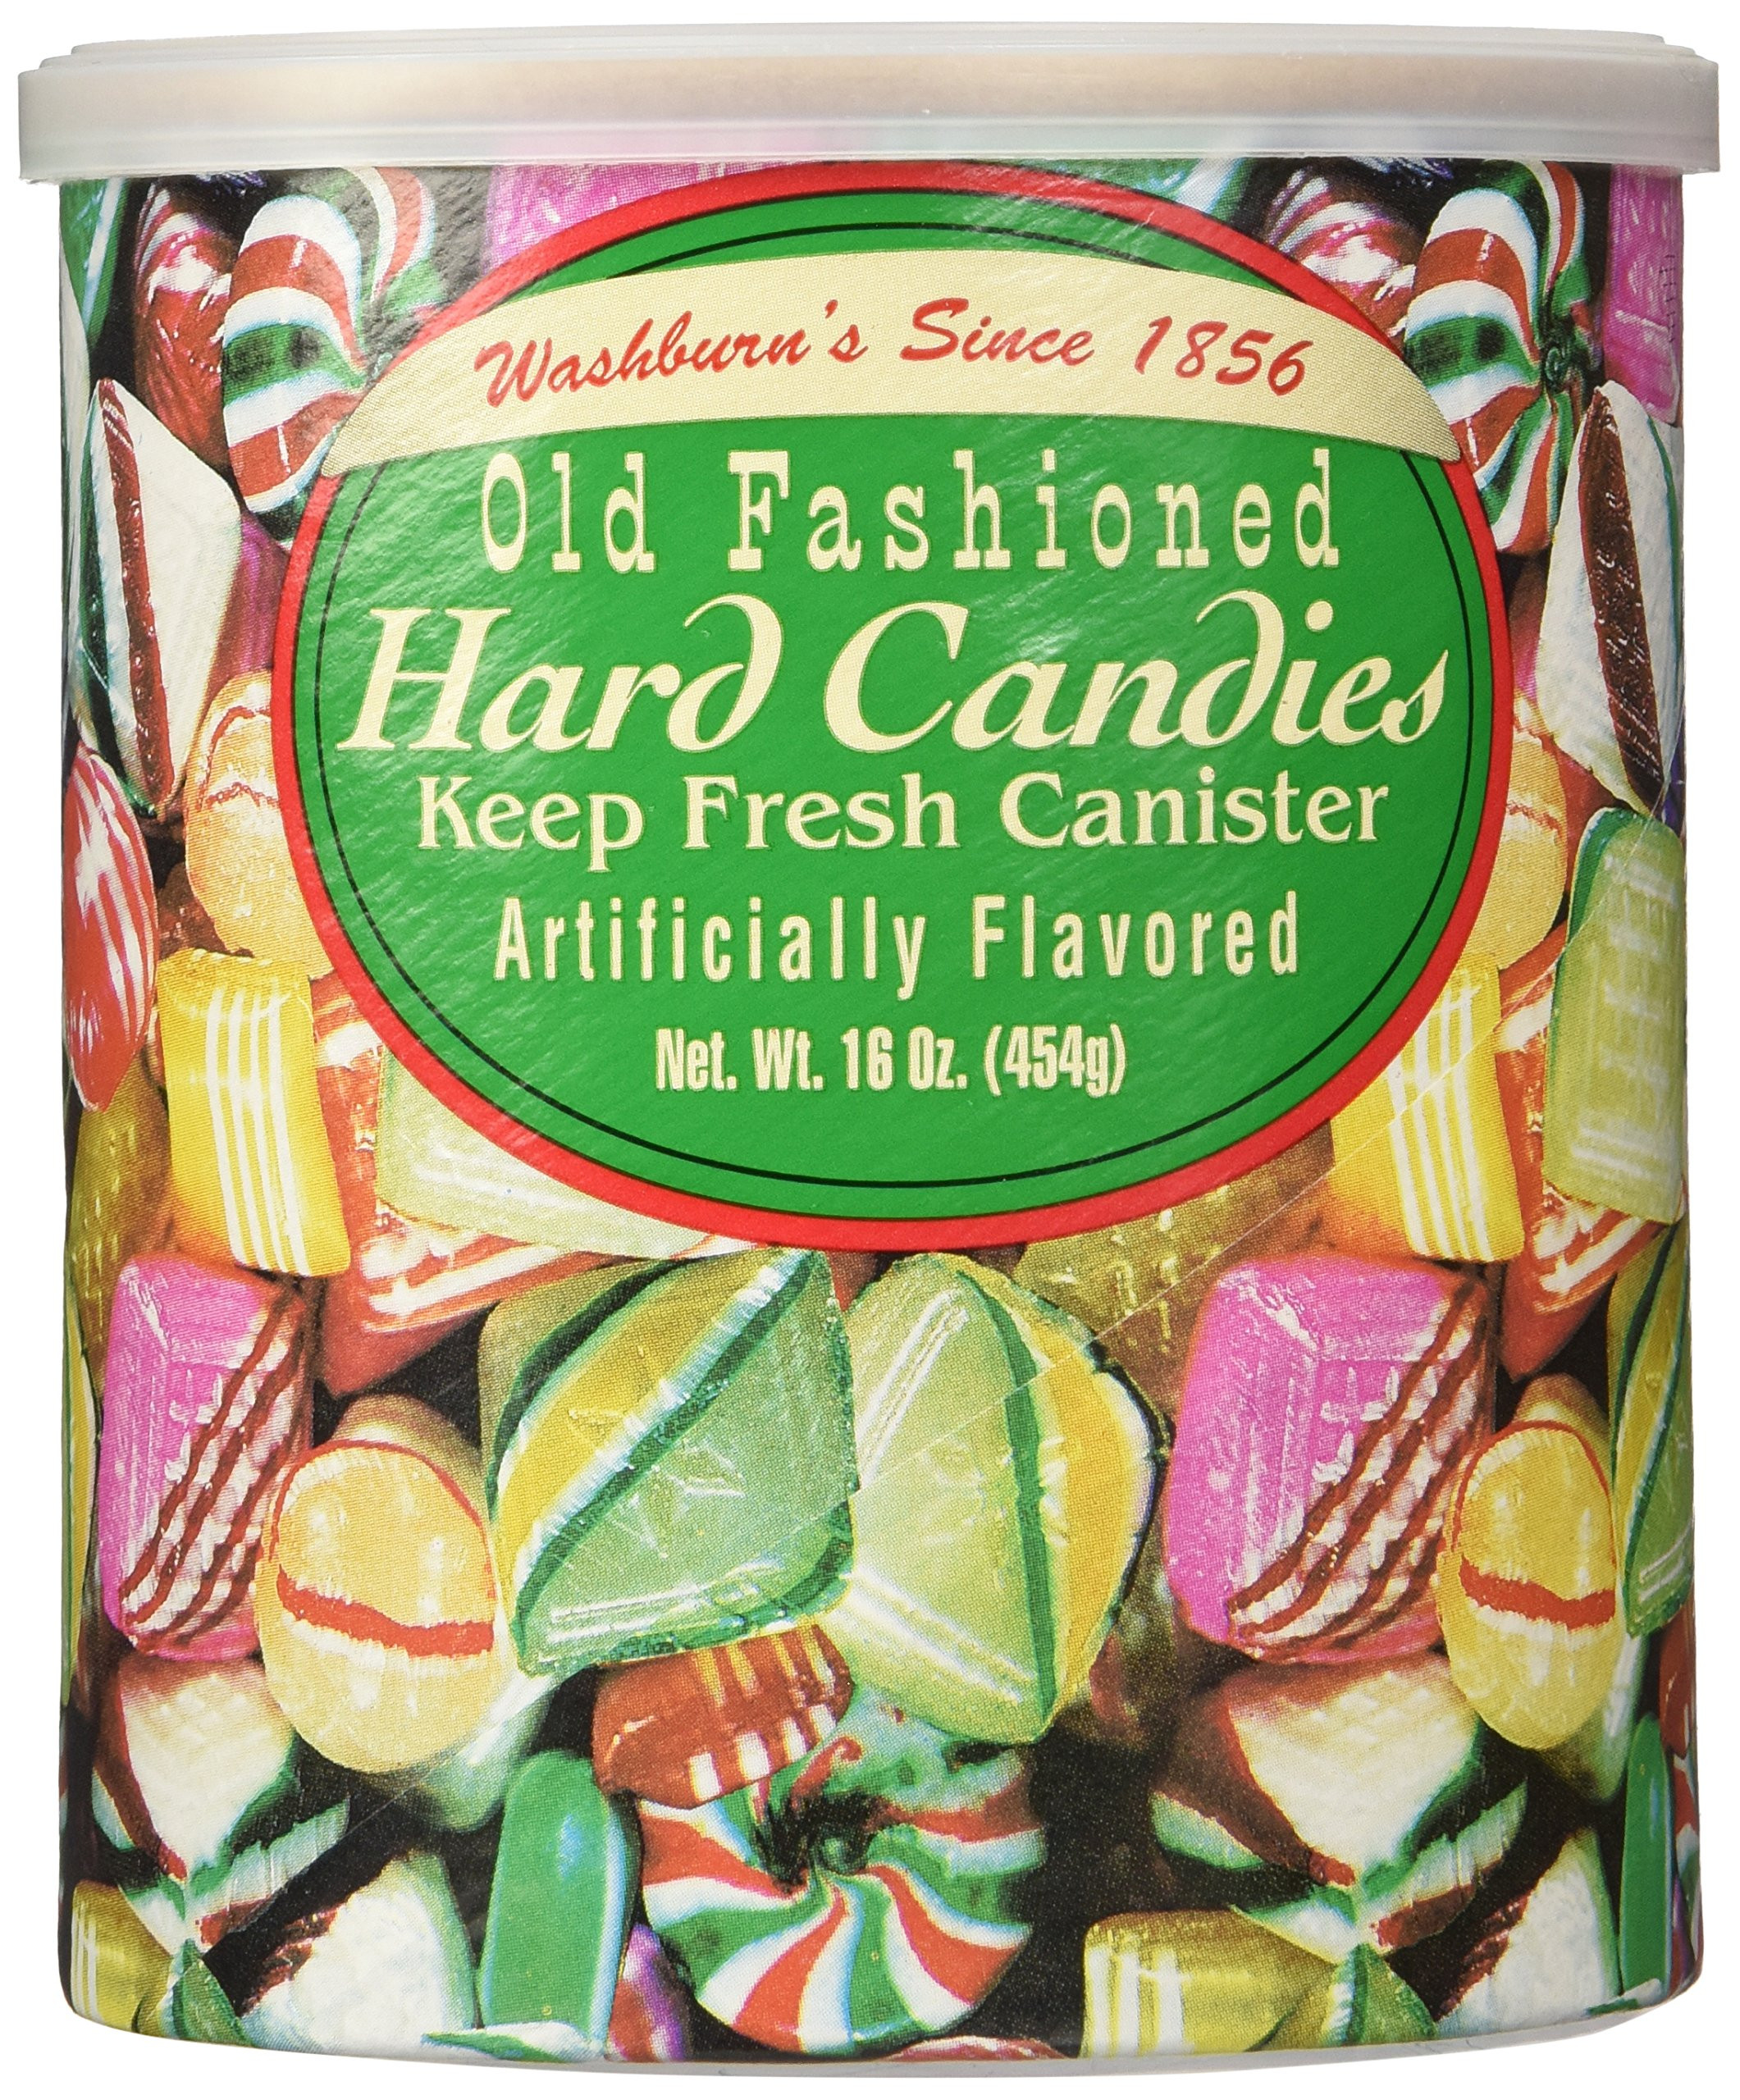 Old Fashioned Filled Christmas Candy
 Amazon Washburn s Old Fashioned Filled Can s 16 Oz